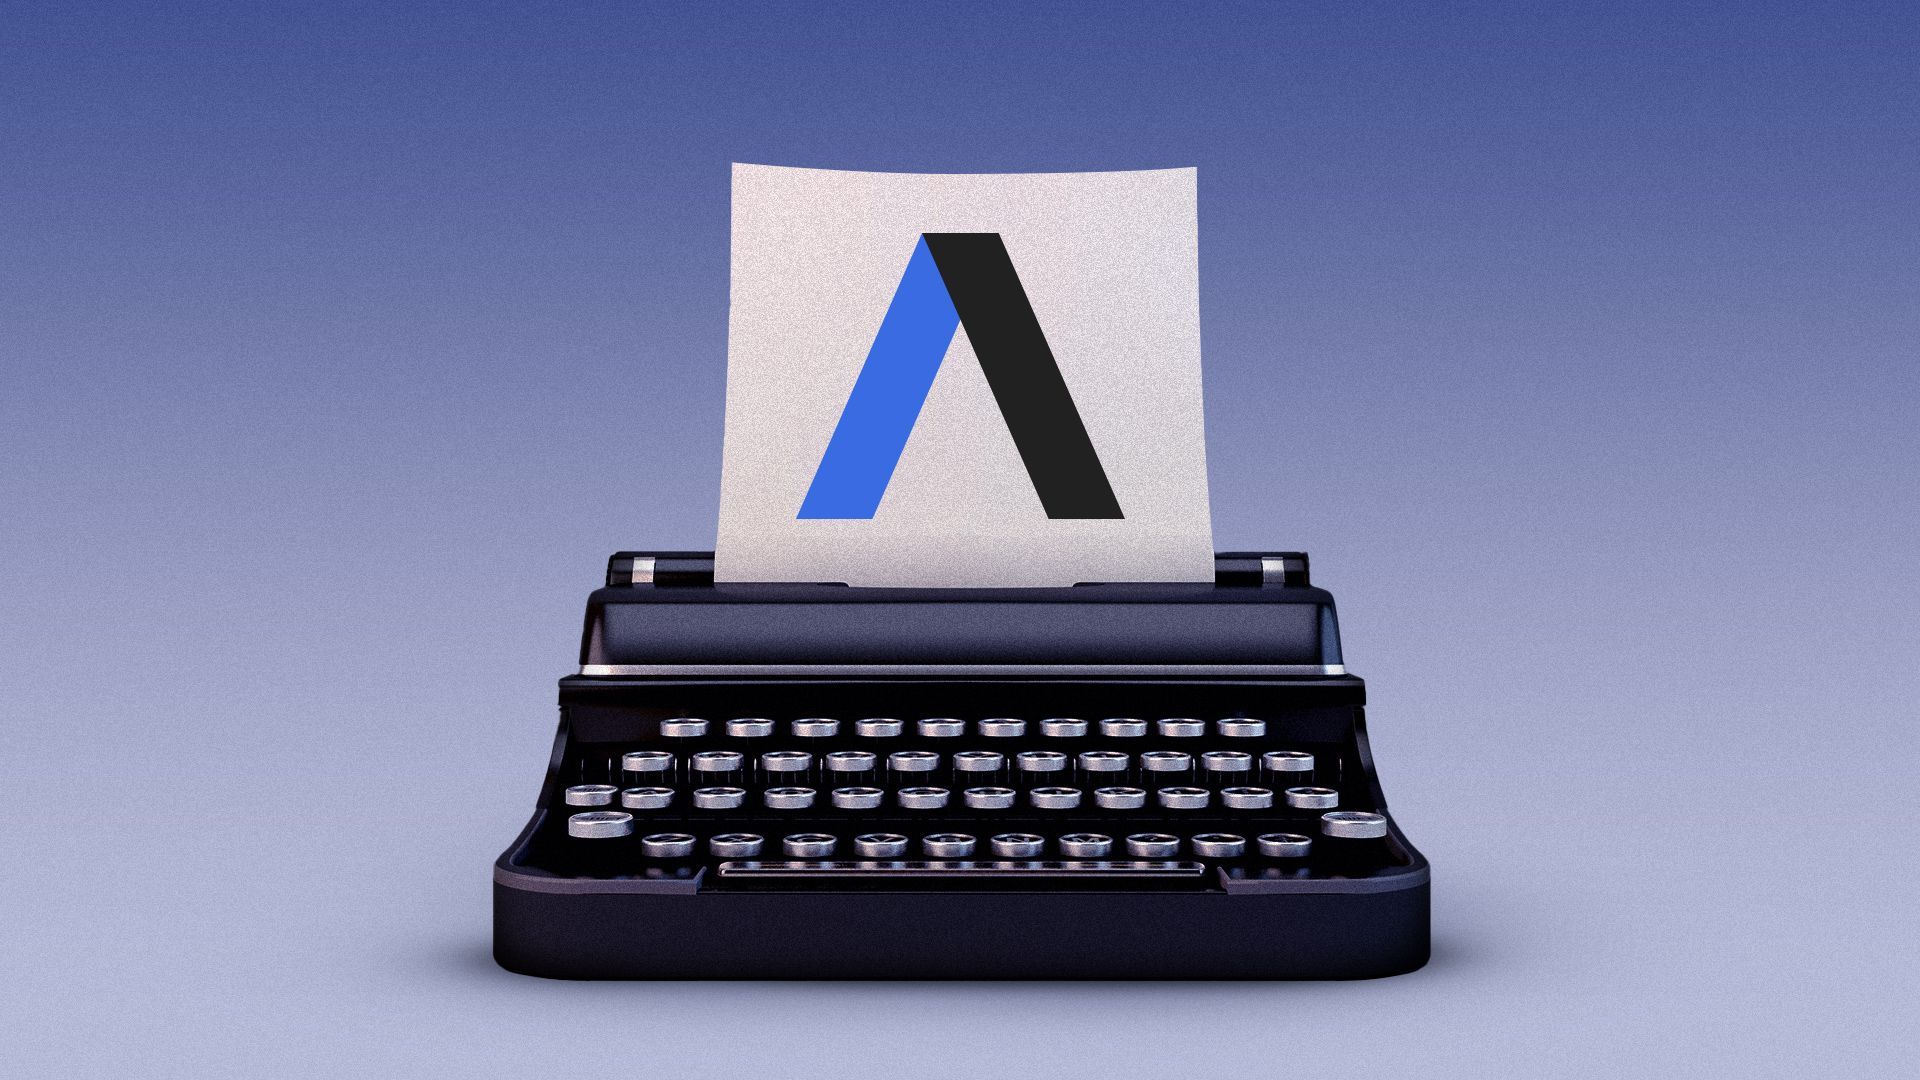 A typewriter with the Axios logo on its paper